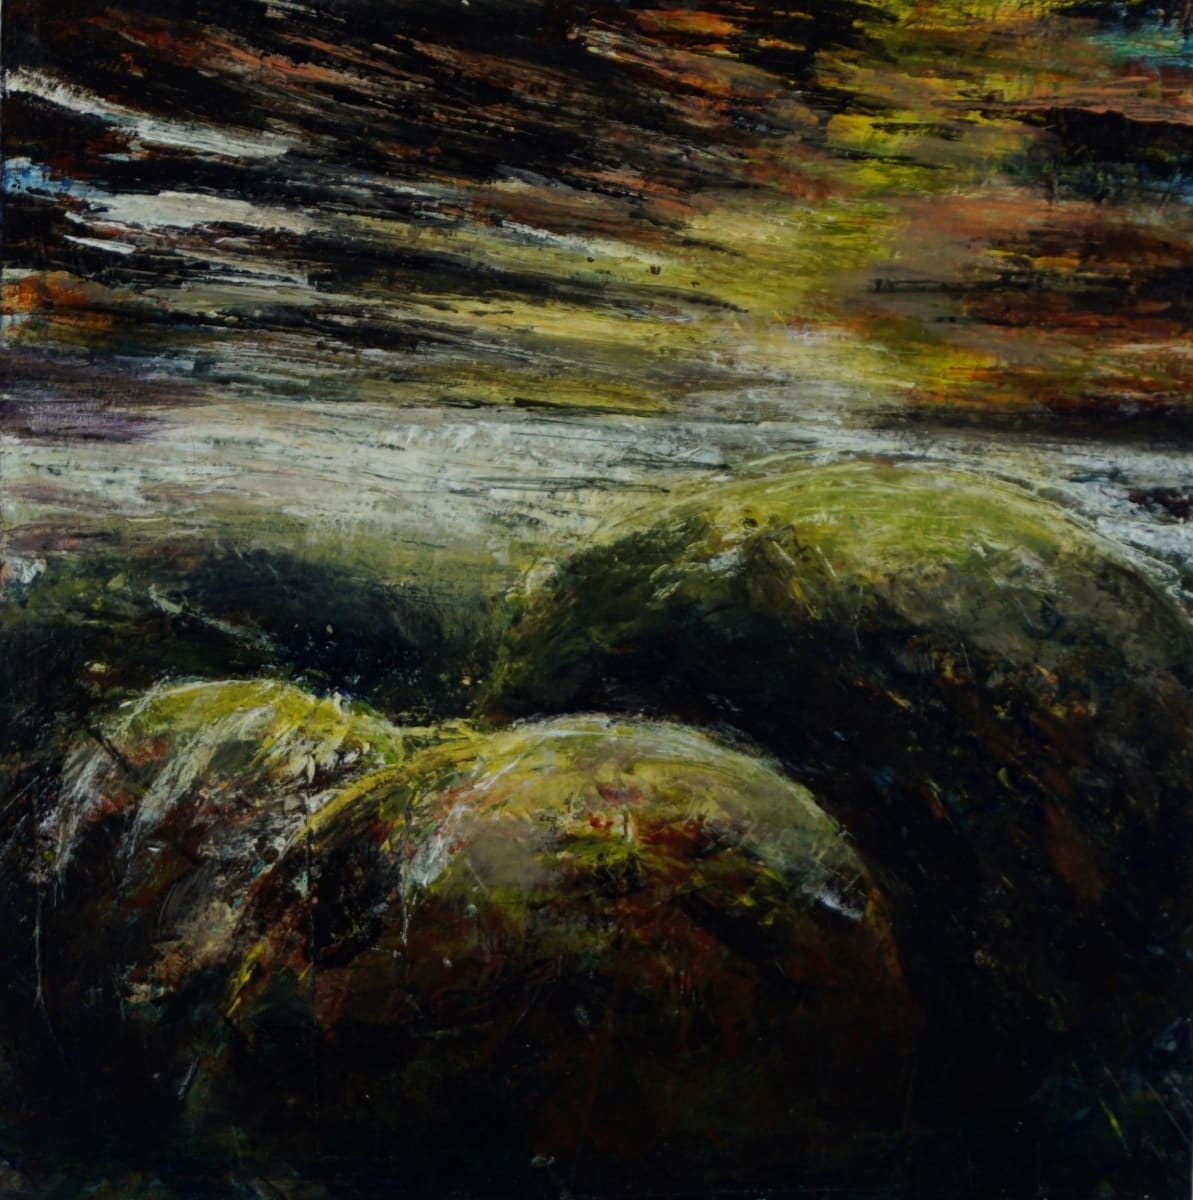 Beneath the Surface by Lisa Scranney Palmer  Image: Memories of a walk amongst native woodland, tumbling water over rocks and reflective pools.